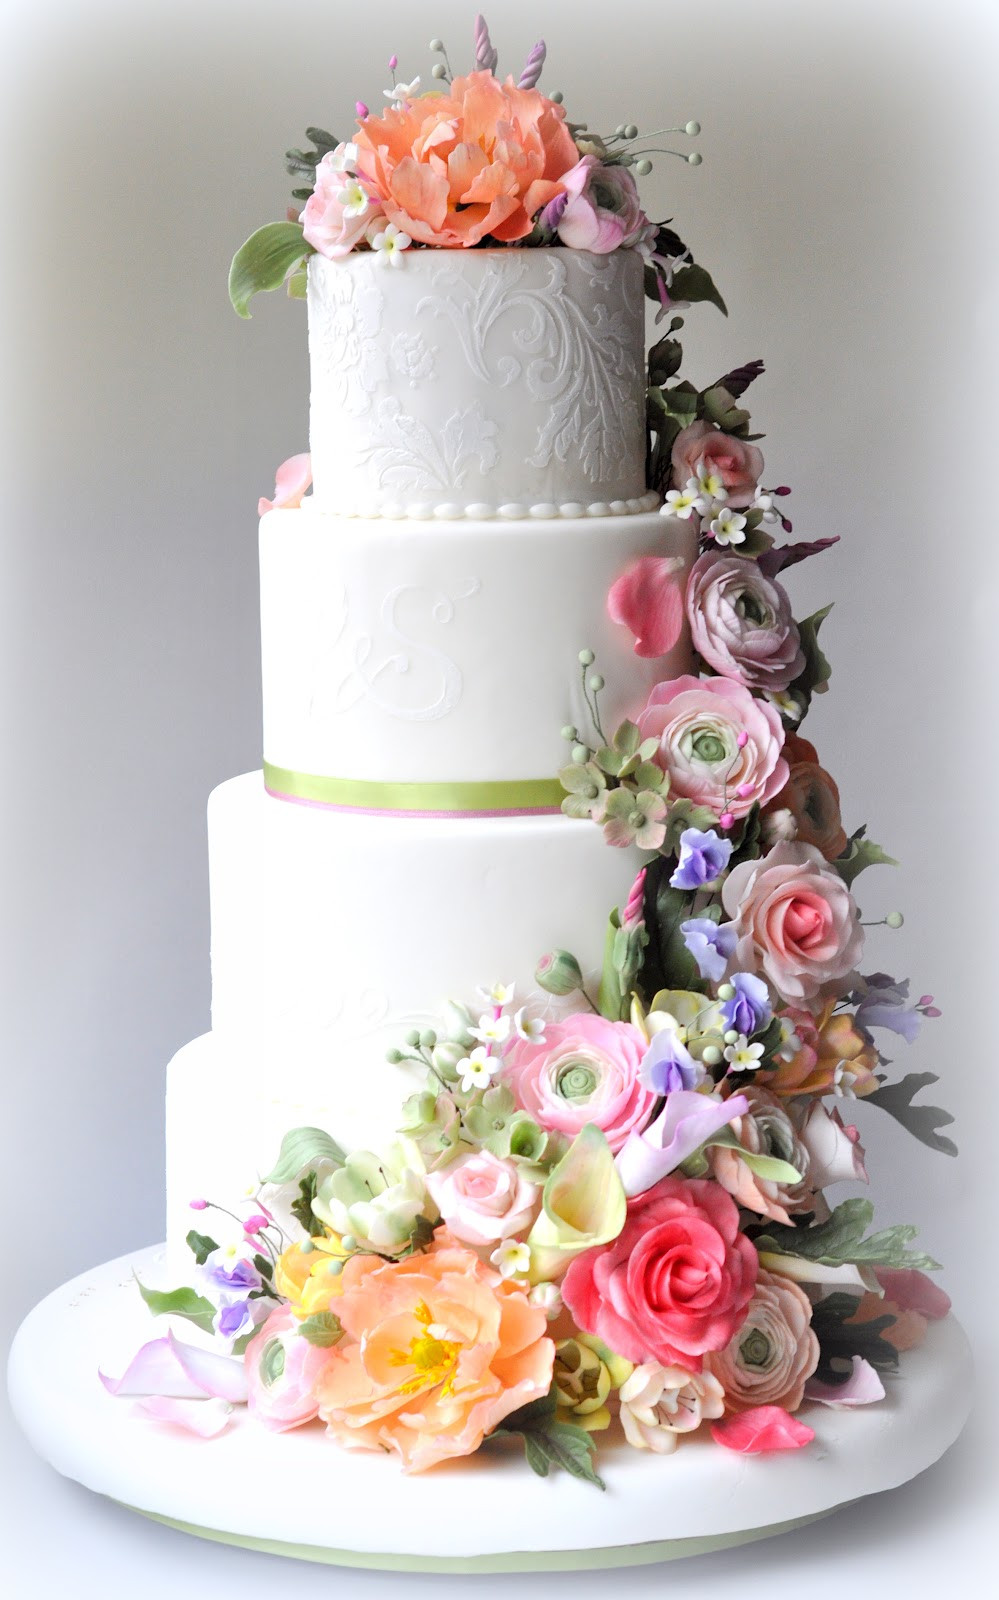 Floral Wedding Cakes
 7 Gorgeous Reasons to Fall in Love With Spring Weddings